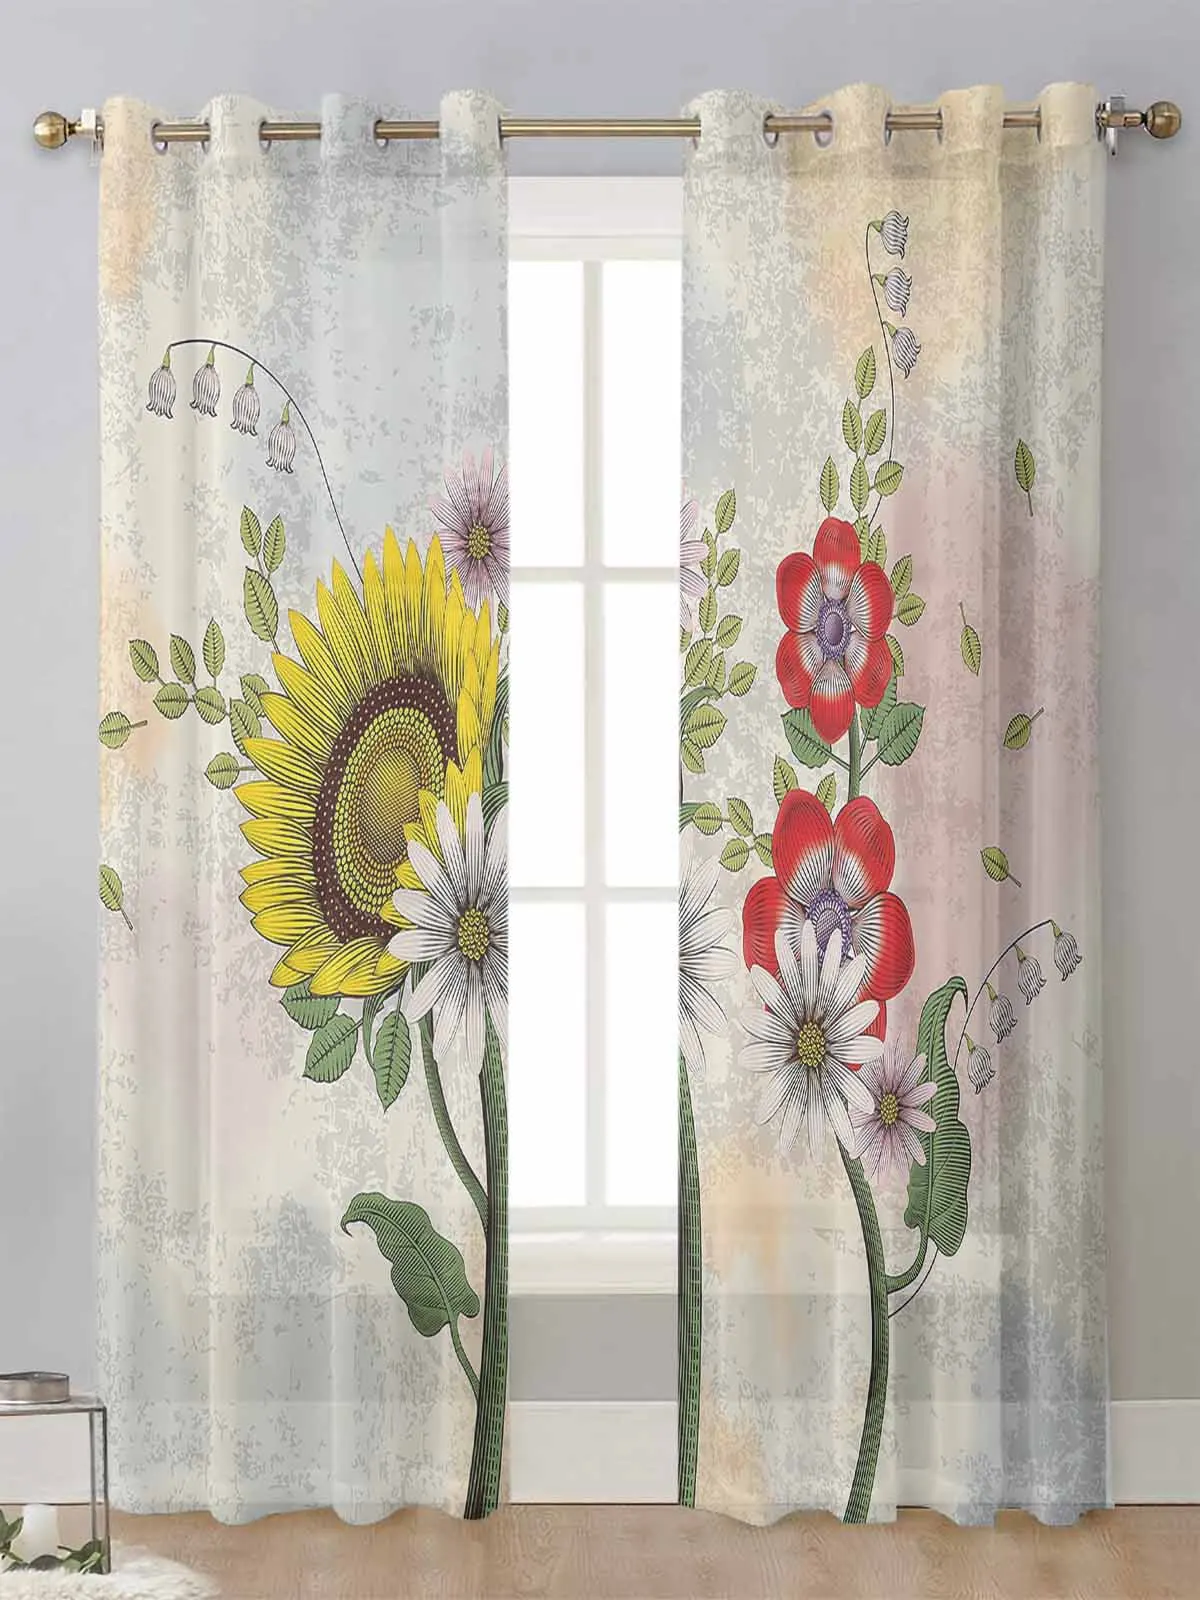 

Sunflower Flowers Leaves Sheer Curtains For Living Room Window Transparent Voile Tulle Curtain Cortinas Drapes Home Decor